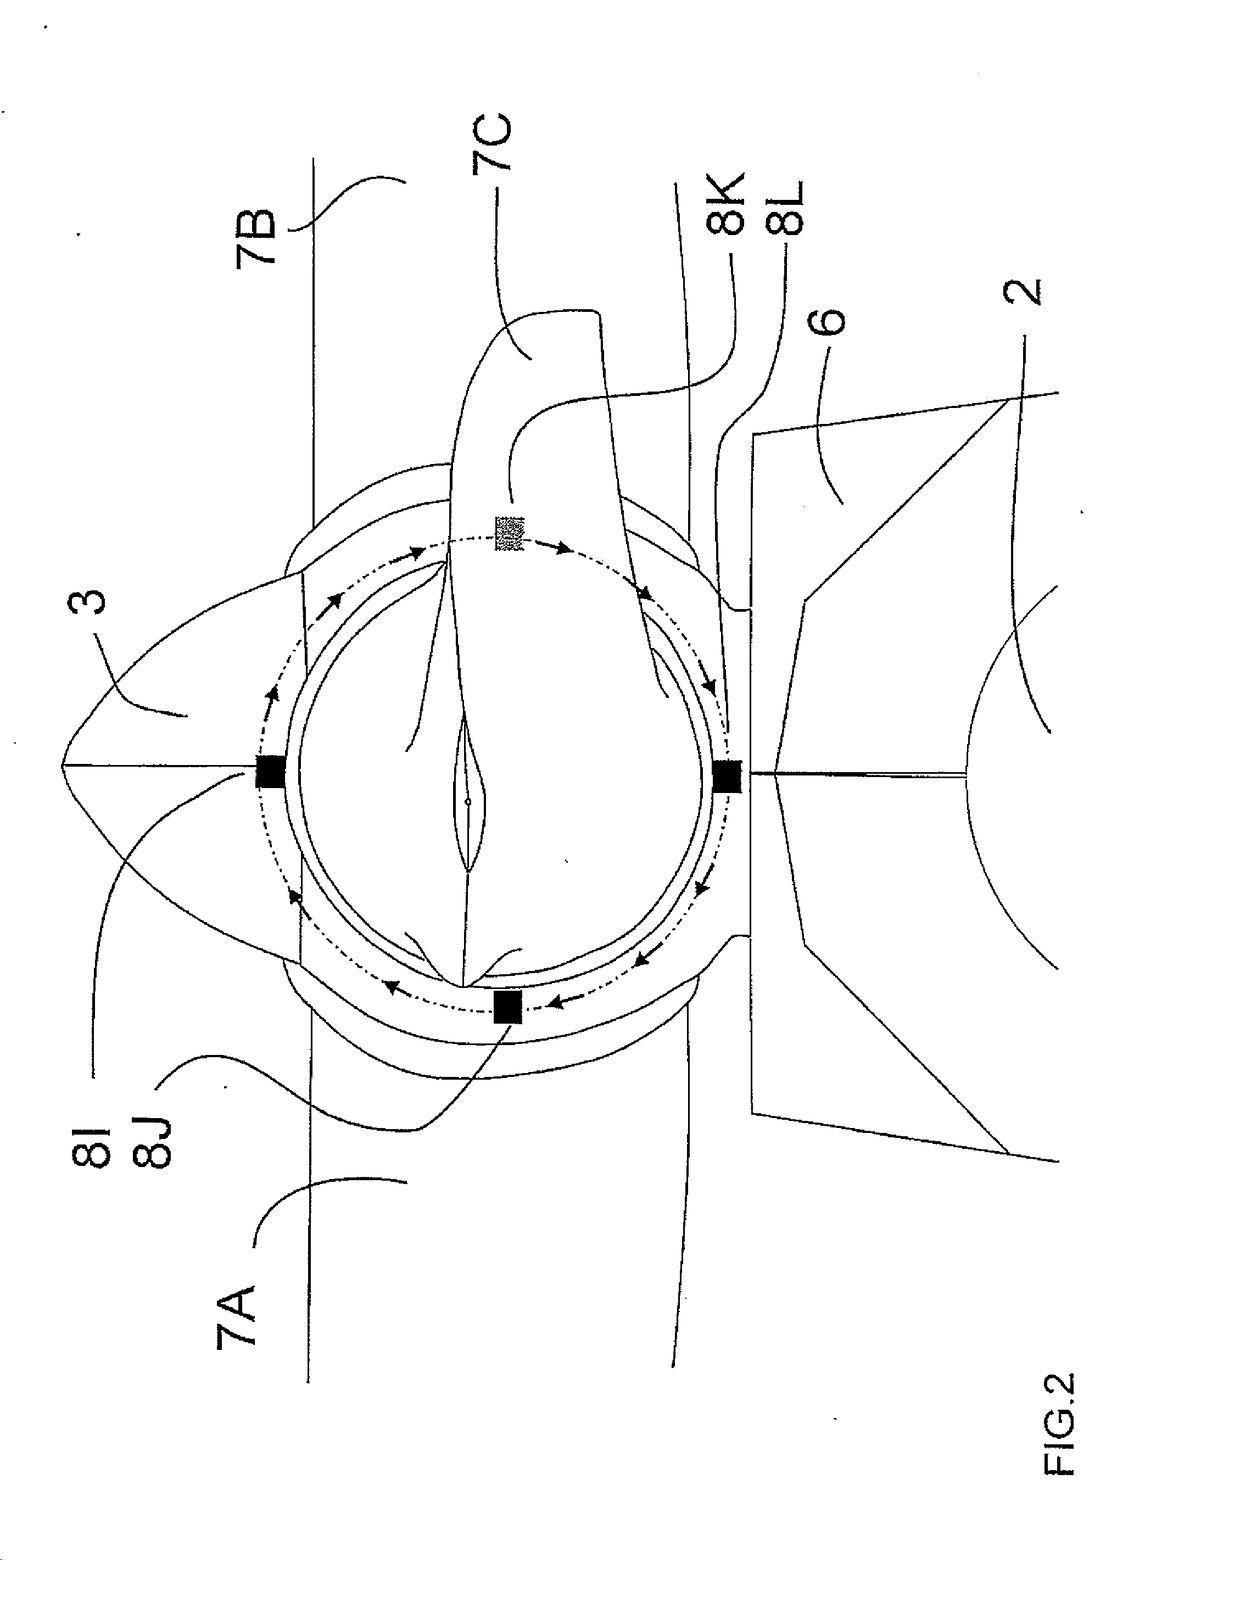 Method for Replacing the Blades of a Wind Turbine to Maintain Safe Operation